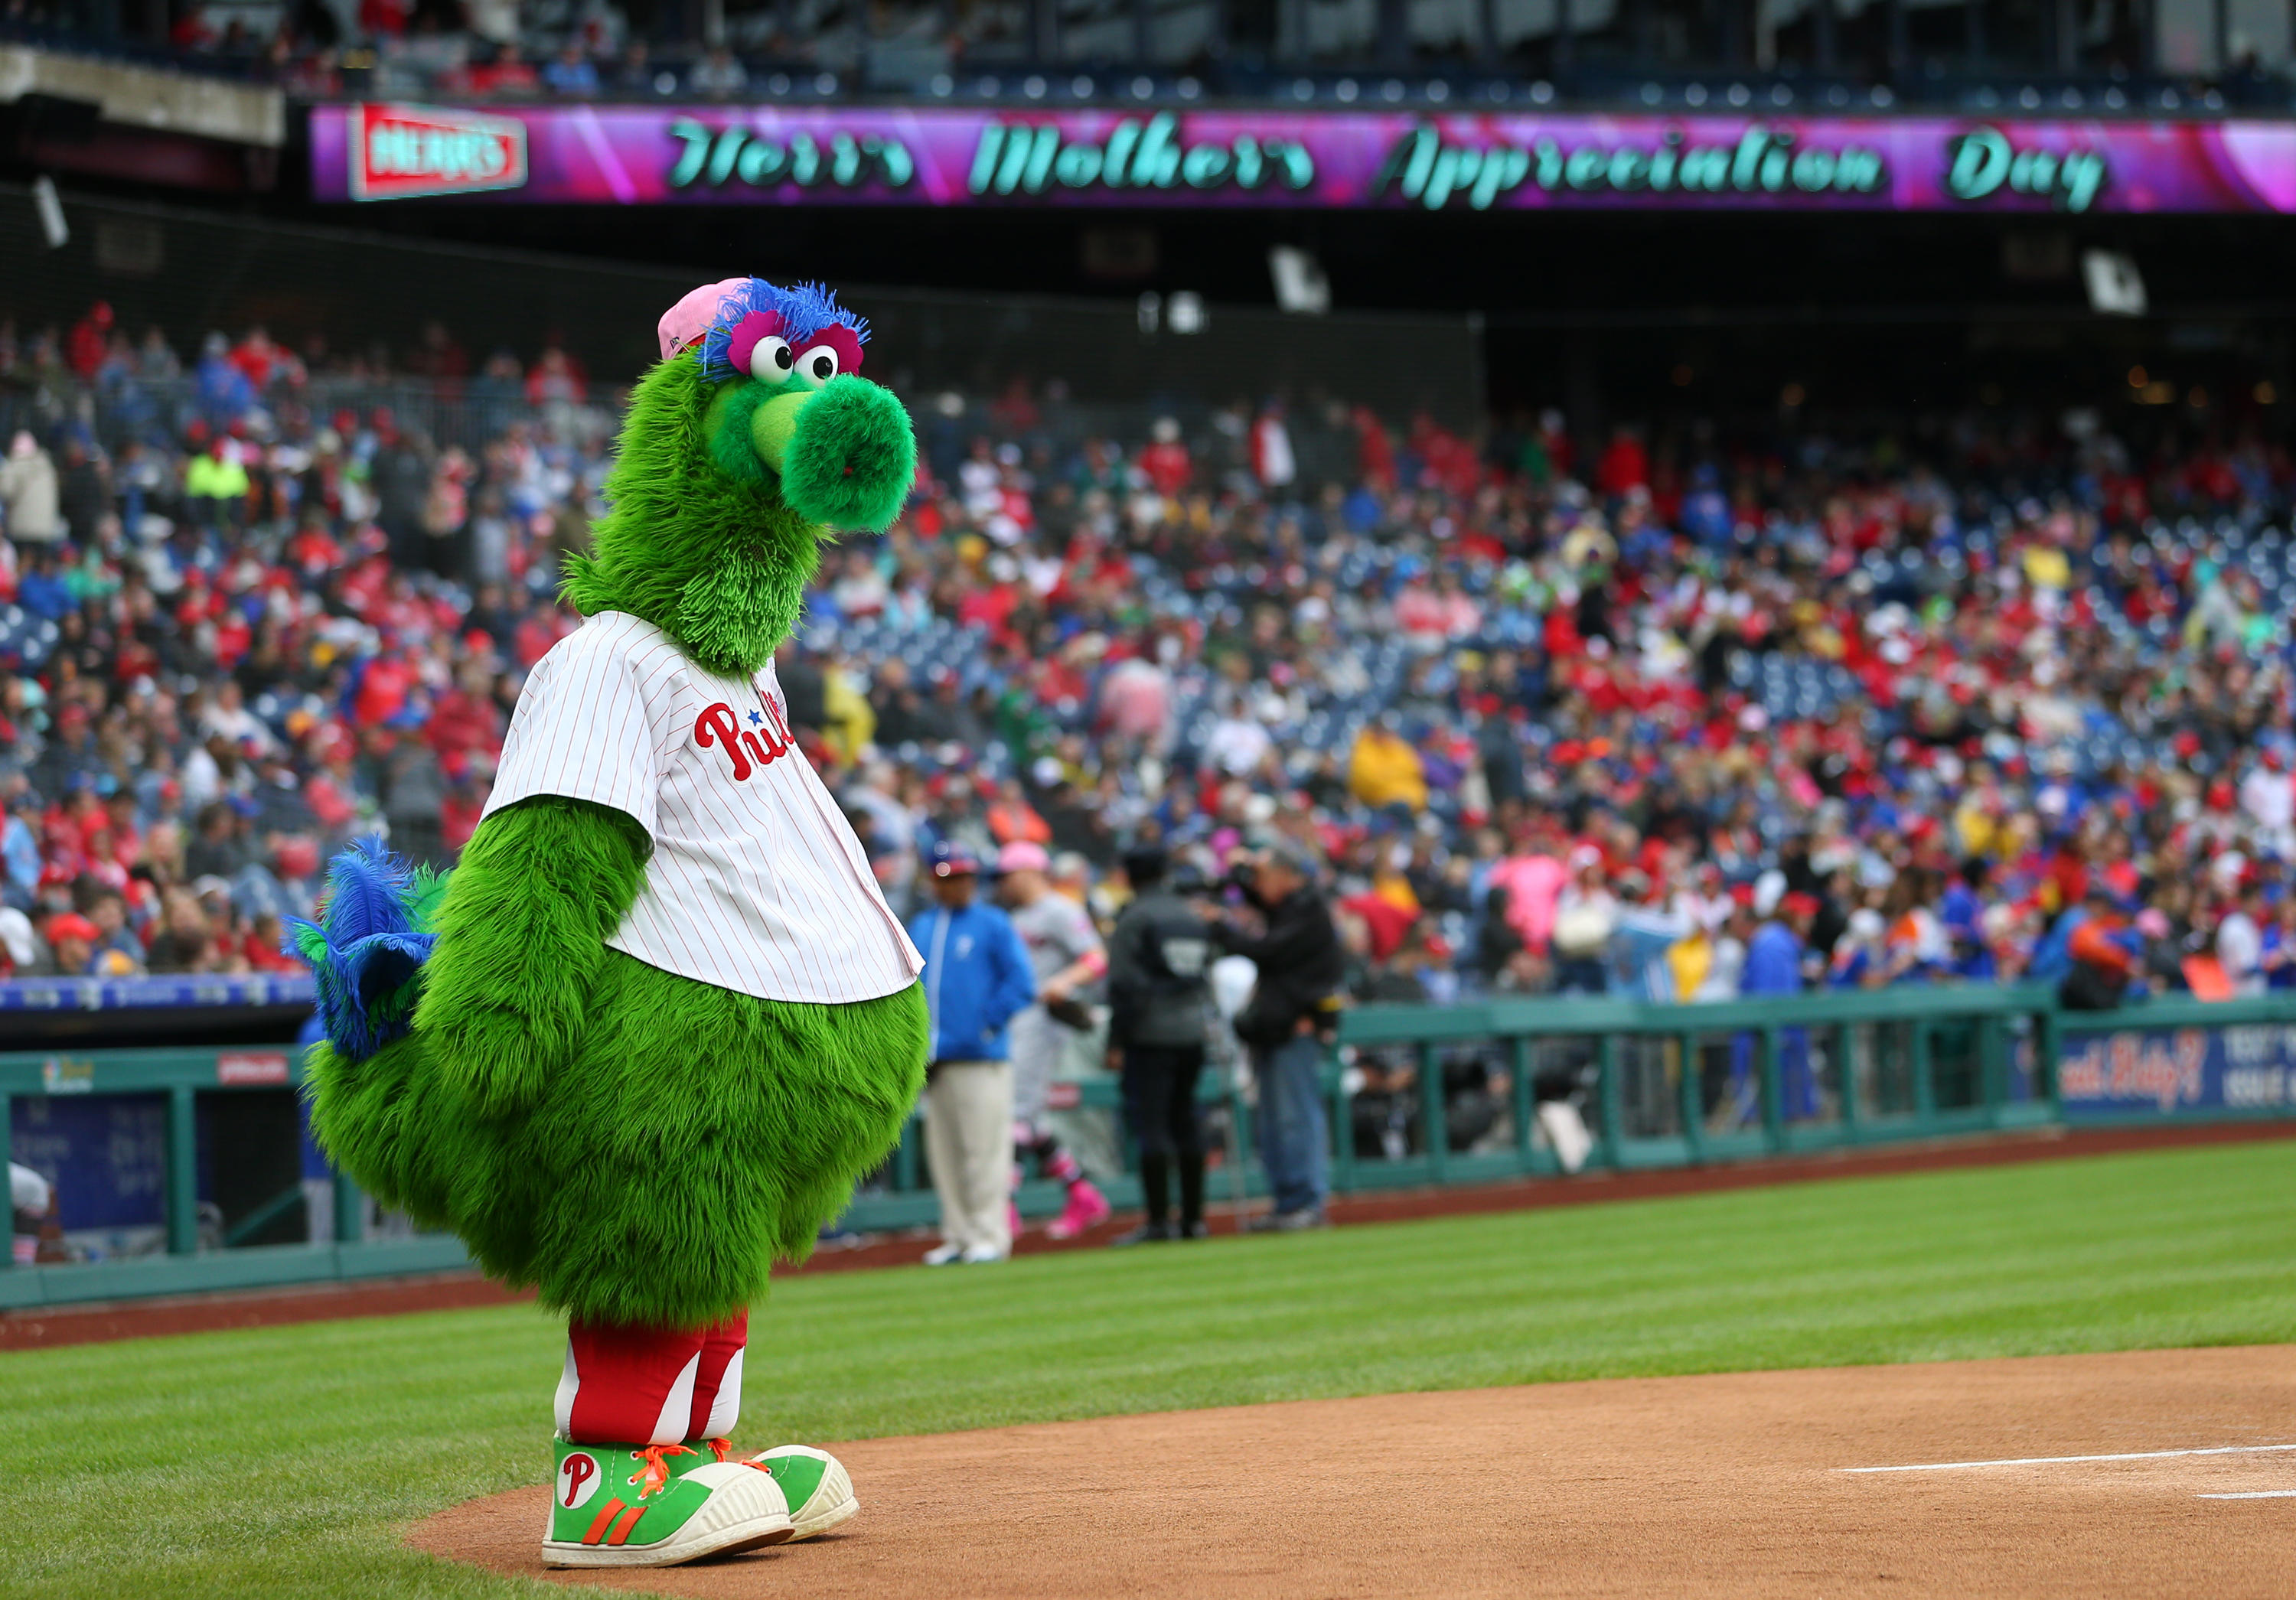 Shoot Hot Dogs with The Phillie Phanatic